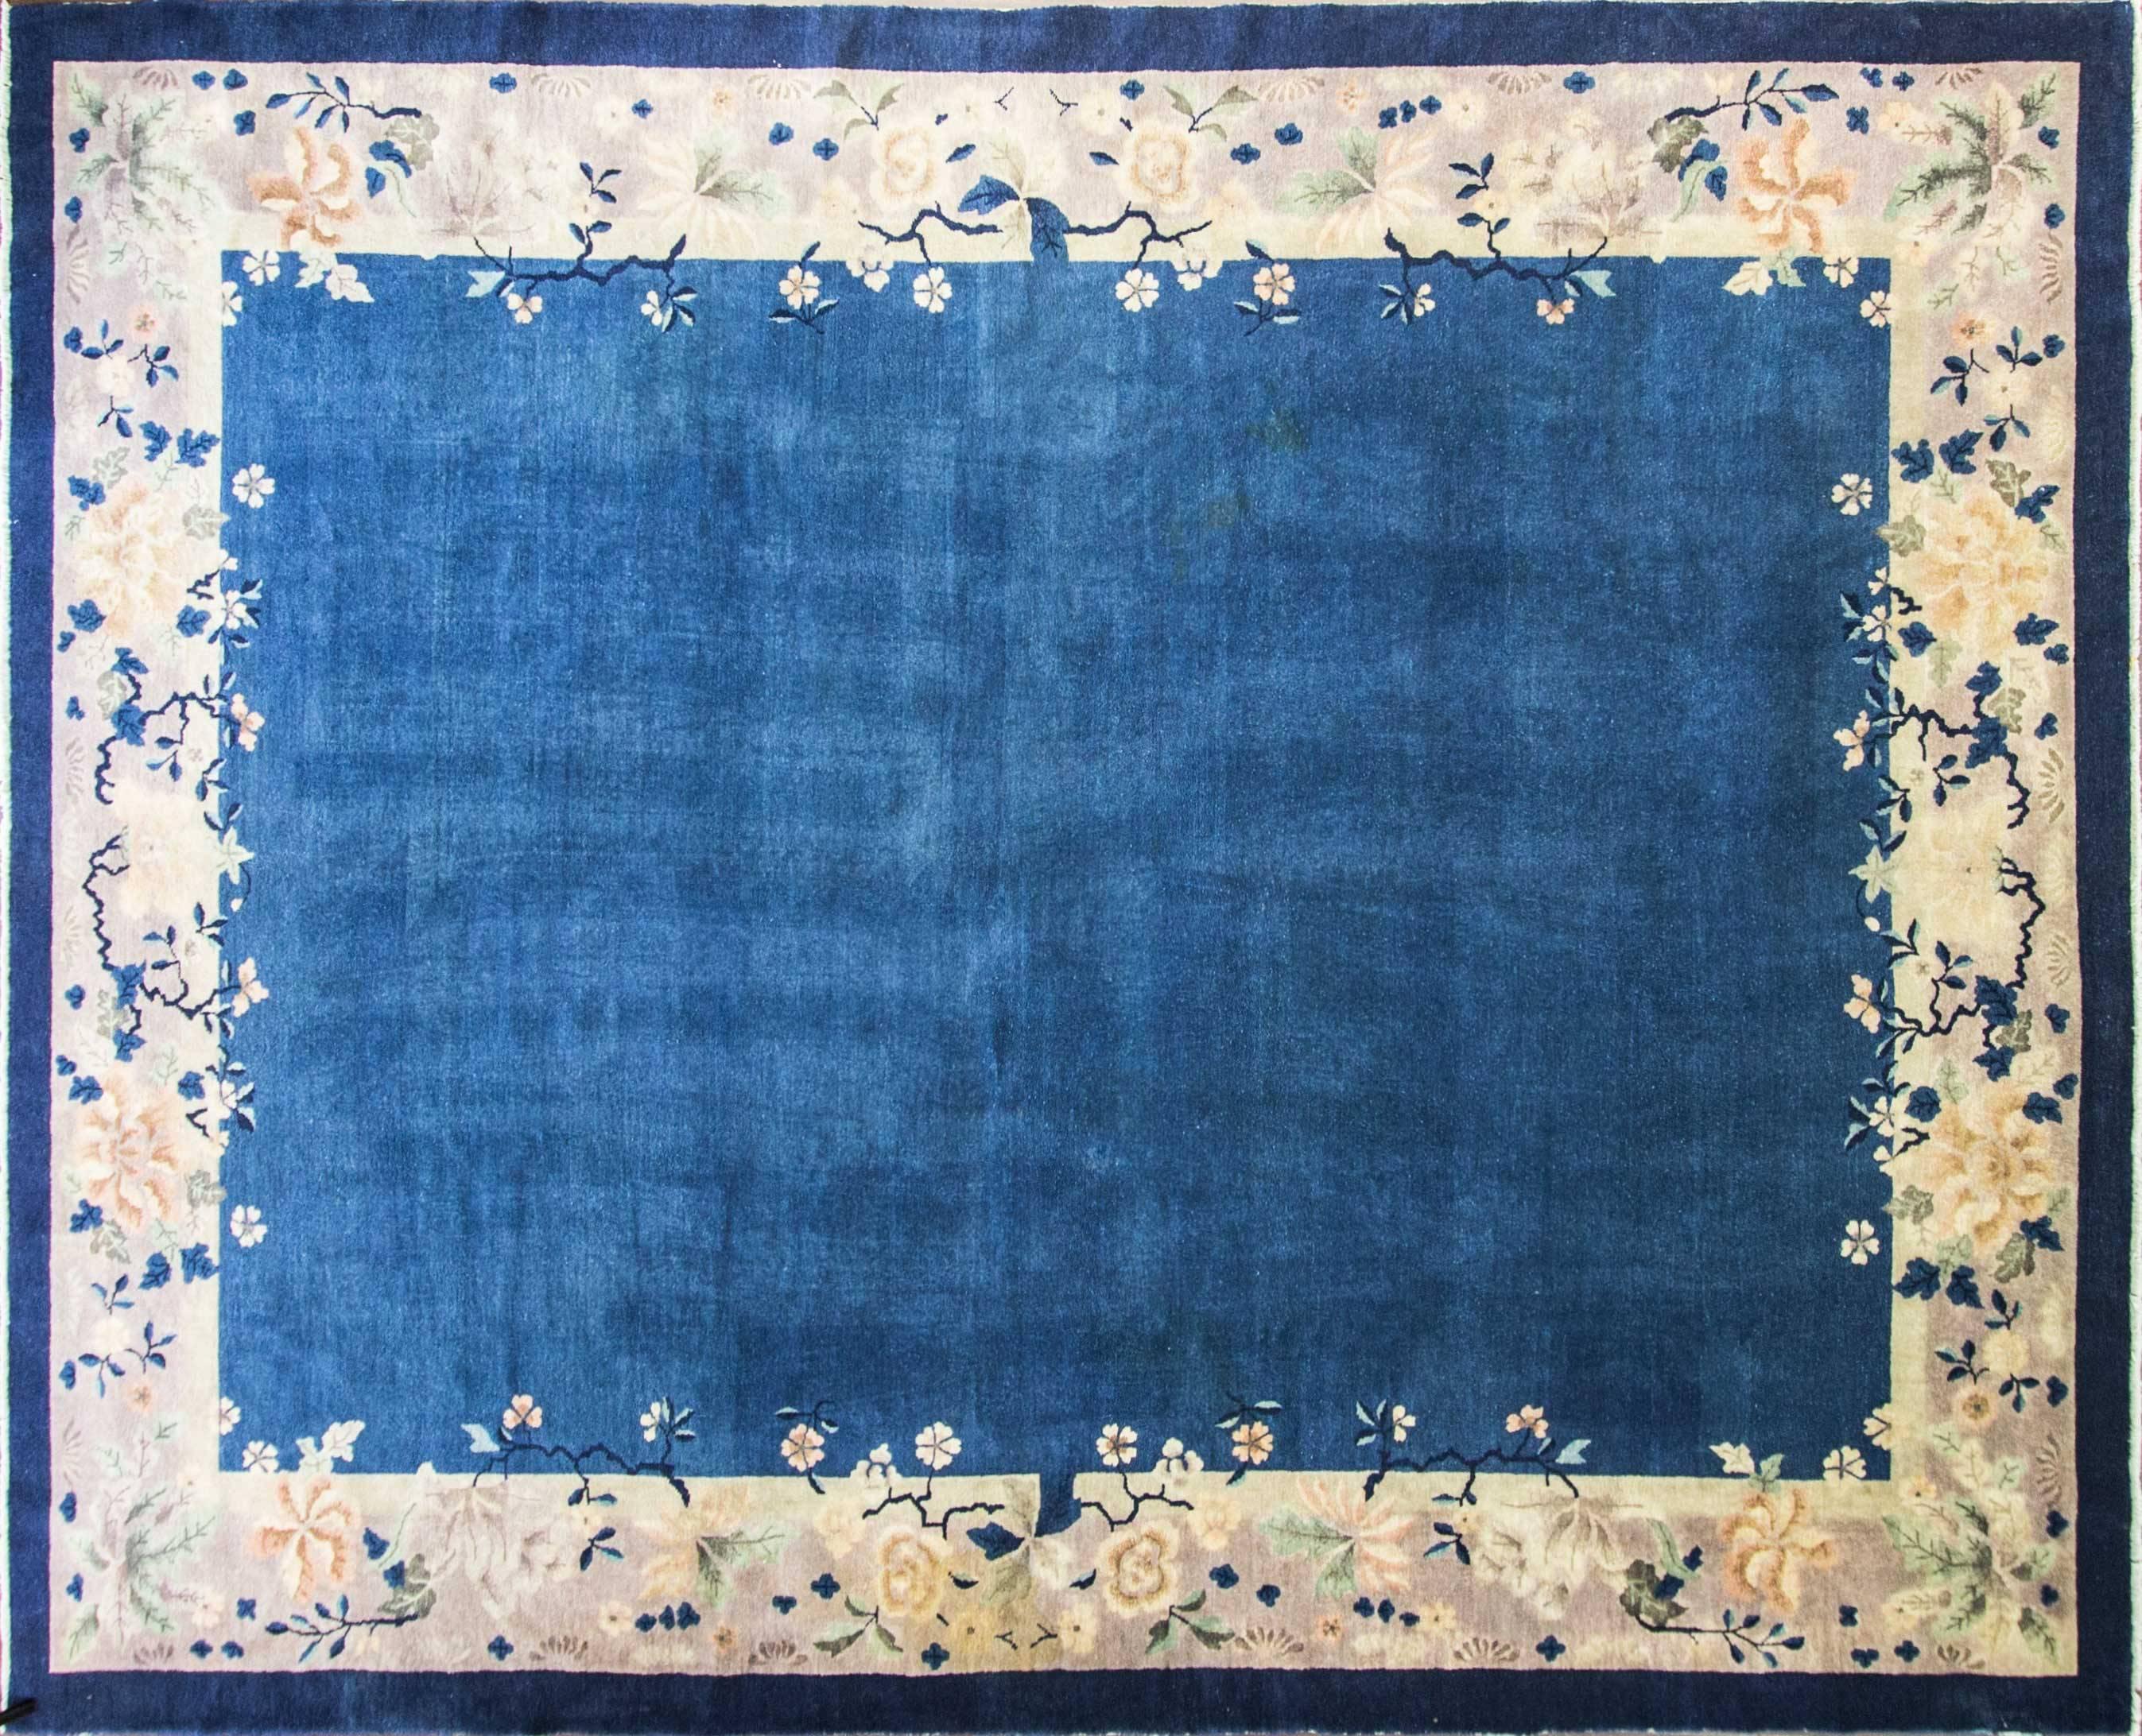 This wonderful Art Deco carpet was made in China, circa 1910s or 1920s. Walter Nichols was great American rug producer (the Art Deco rugs which he did not originate them) in Tientsin. The rugs made of wool and silk with bold vibrant colors and the